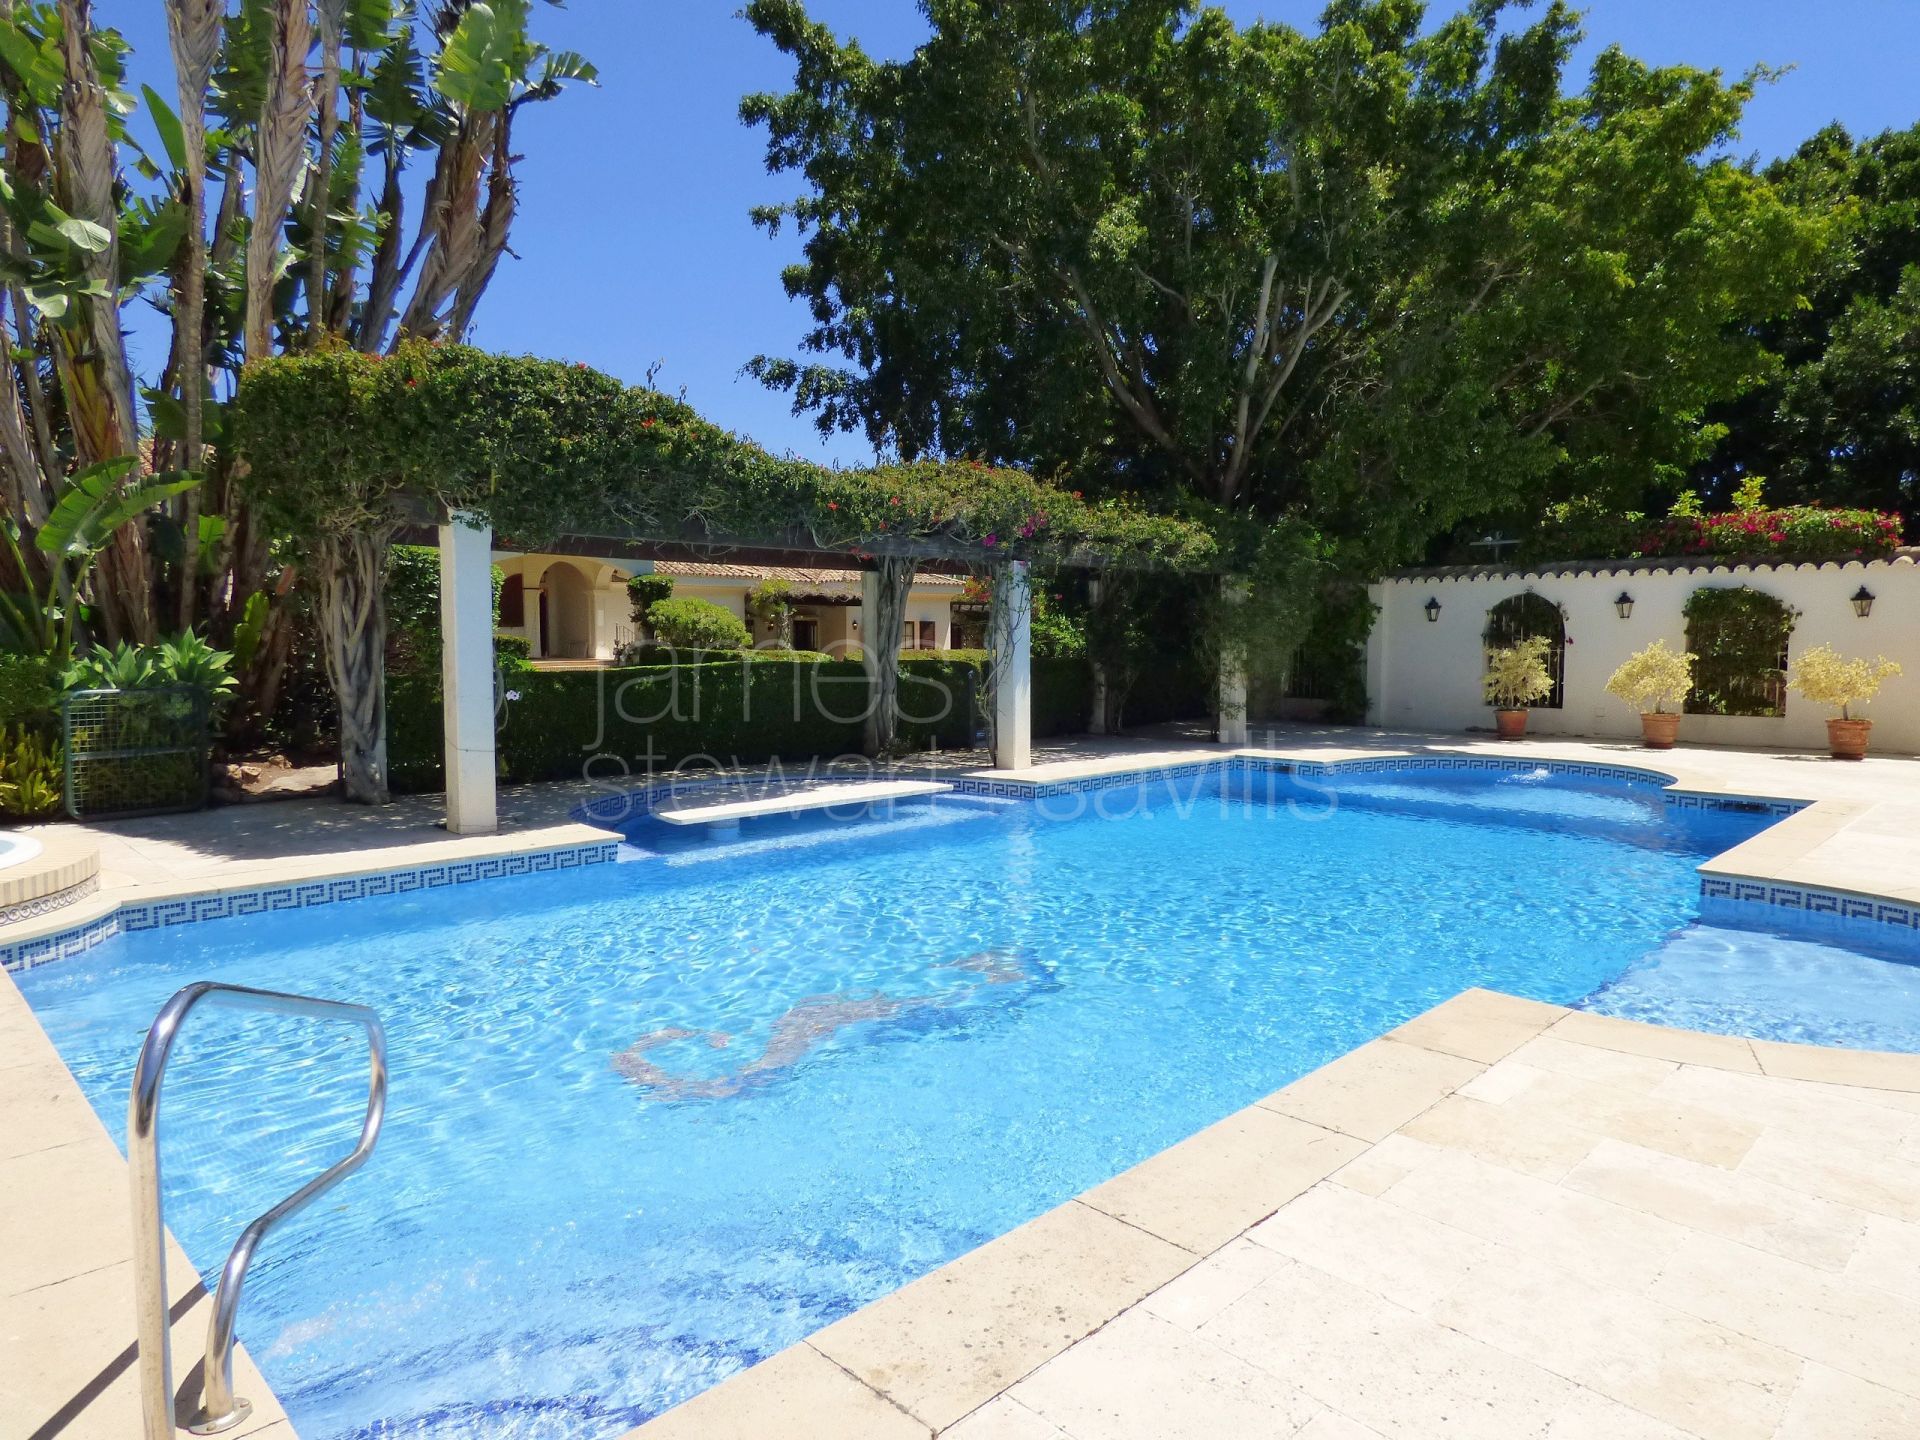 Spacious and very private villa in the D zone of Sotogrande Central